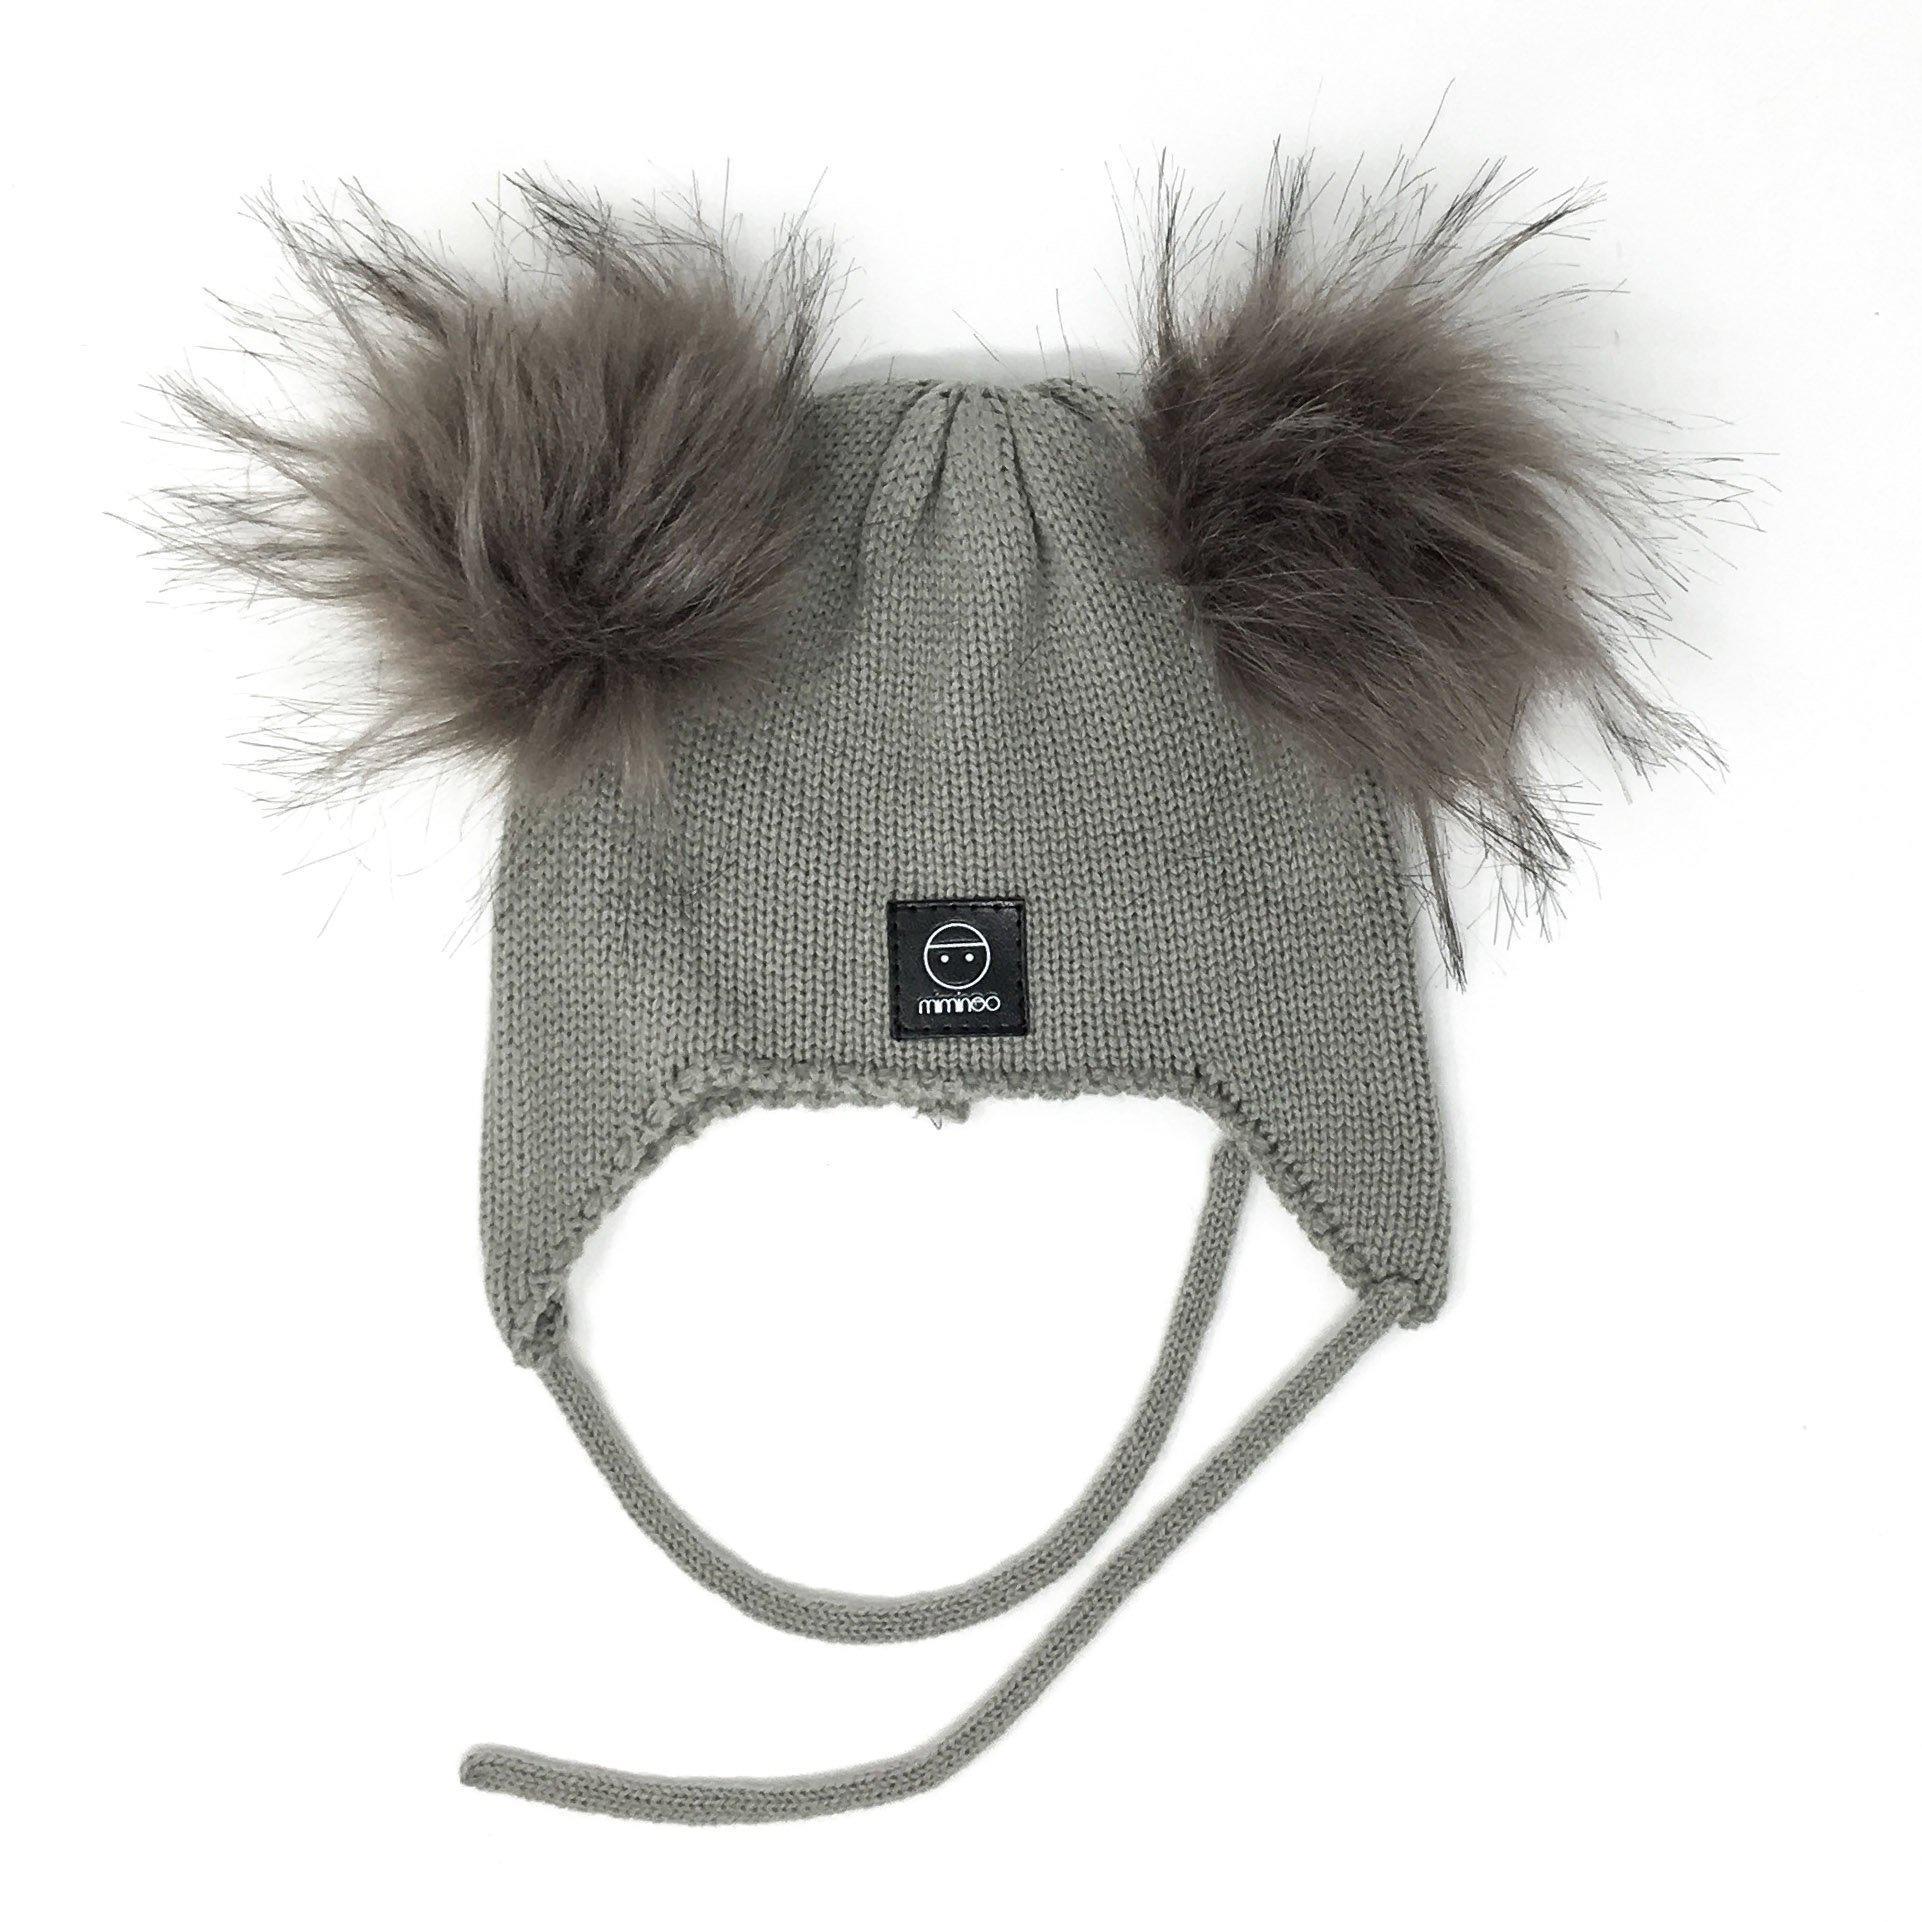 Baby Snap On Pom Poms Beanie with Strings Grey-Winter Beanies-Mix & Match baby beanie winter hat snap on removable pompom single or double by MKS Miminoo Arizona USA